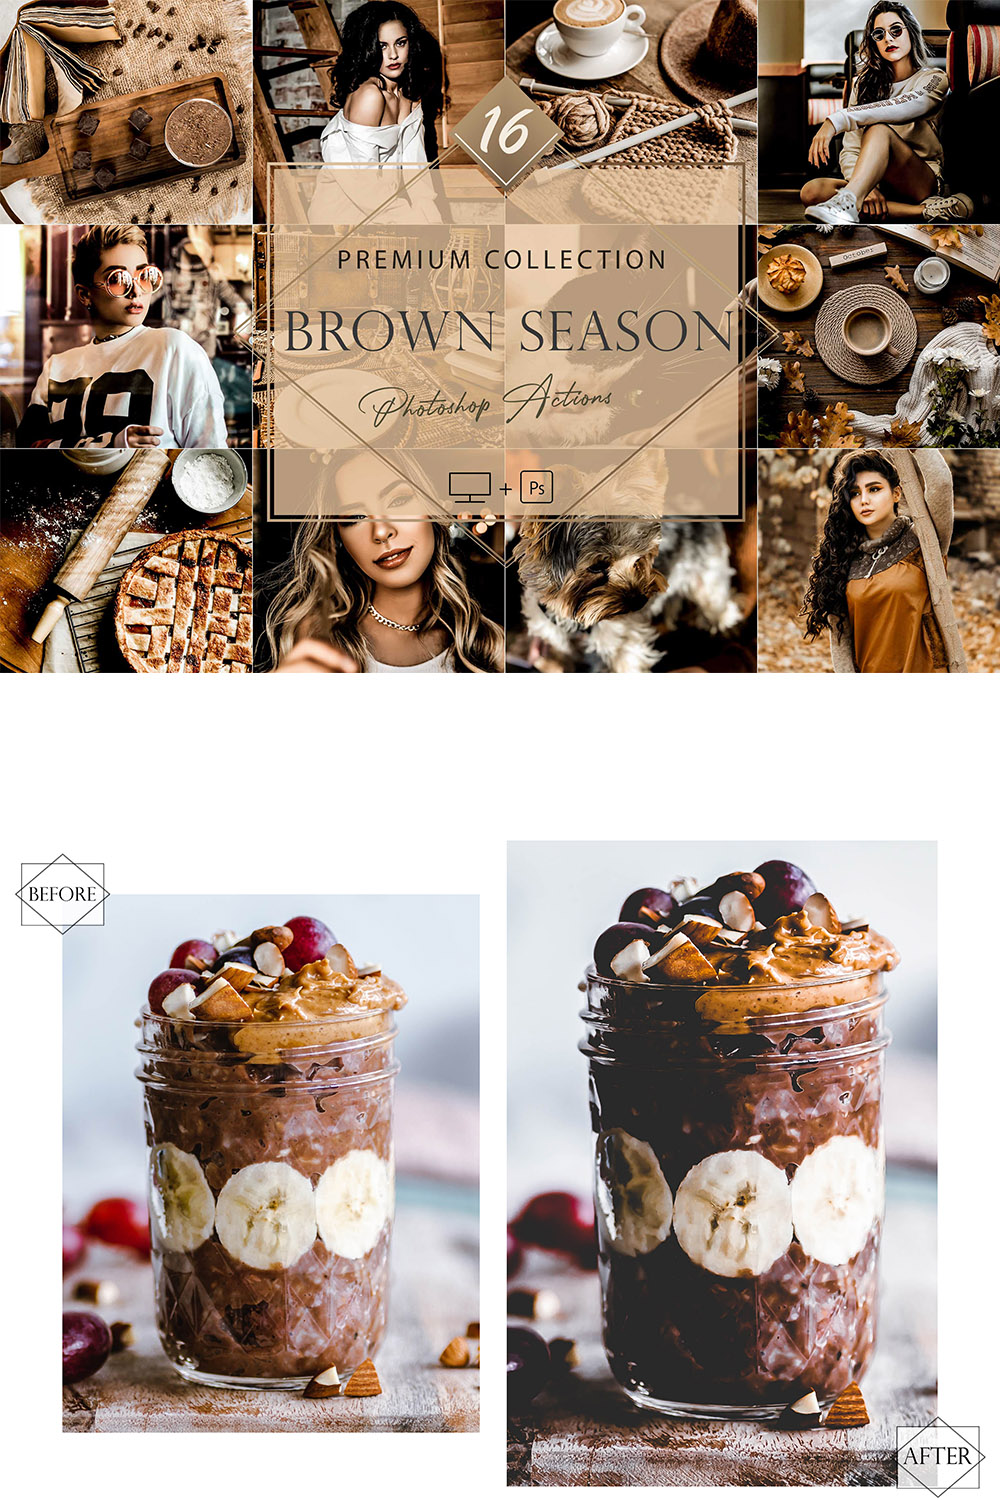 16 Photoshop Actions, Brown Season Ps Action, Moody ACR Preset, Fall Filter, Lifestyle Theme For Instagram, Dark Presets, Warm portrait pinterest preview image.